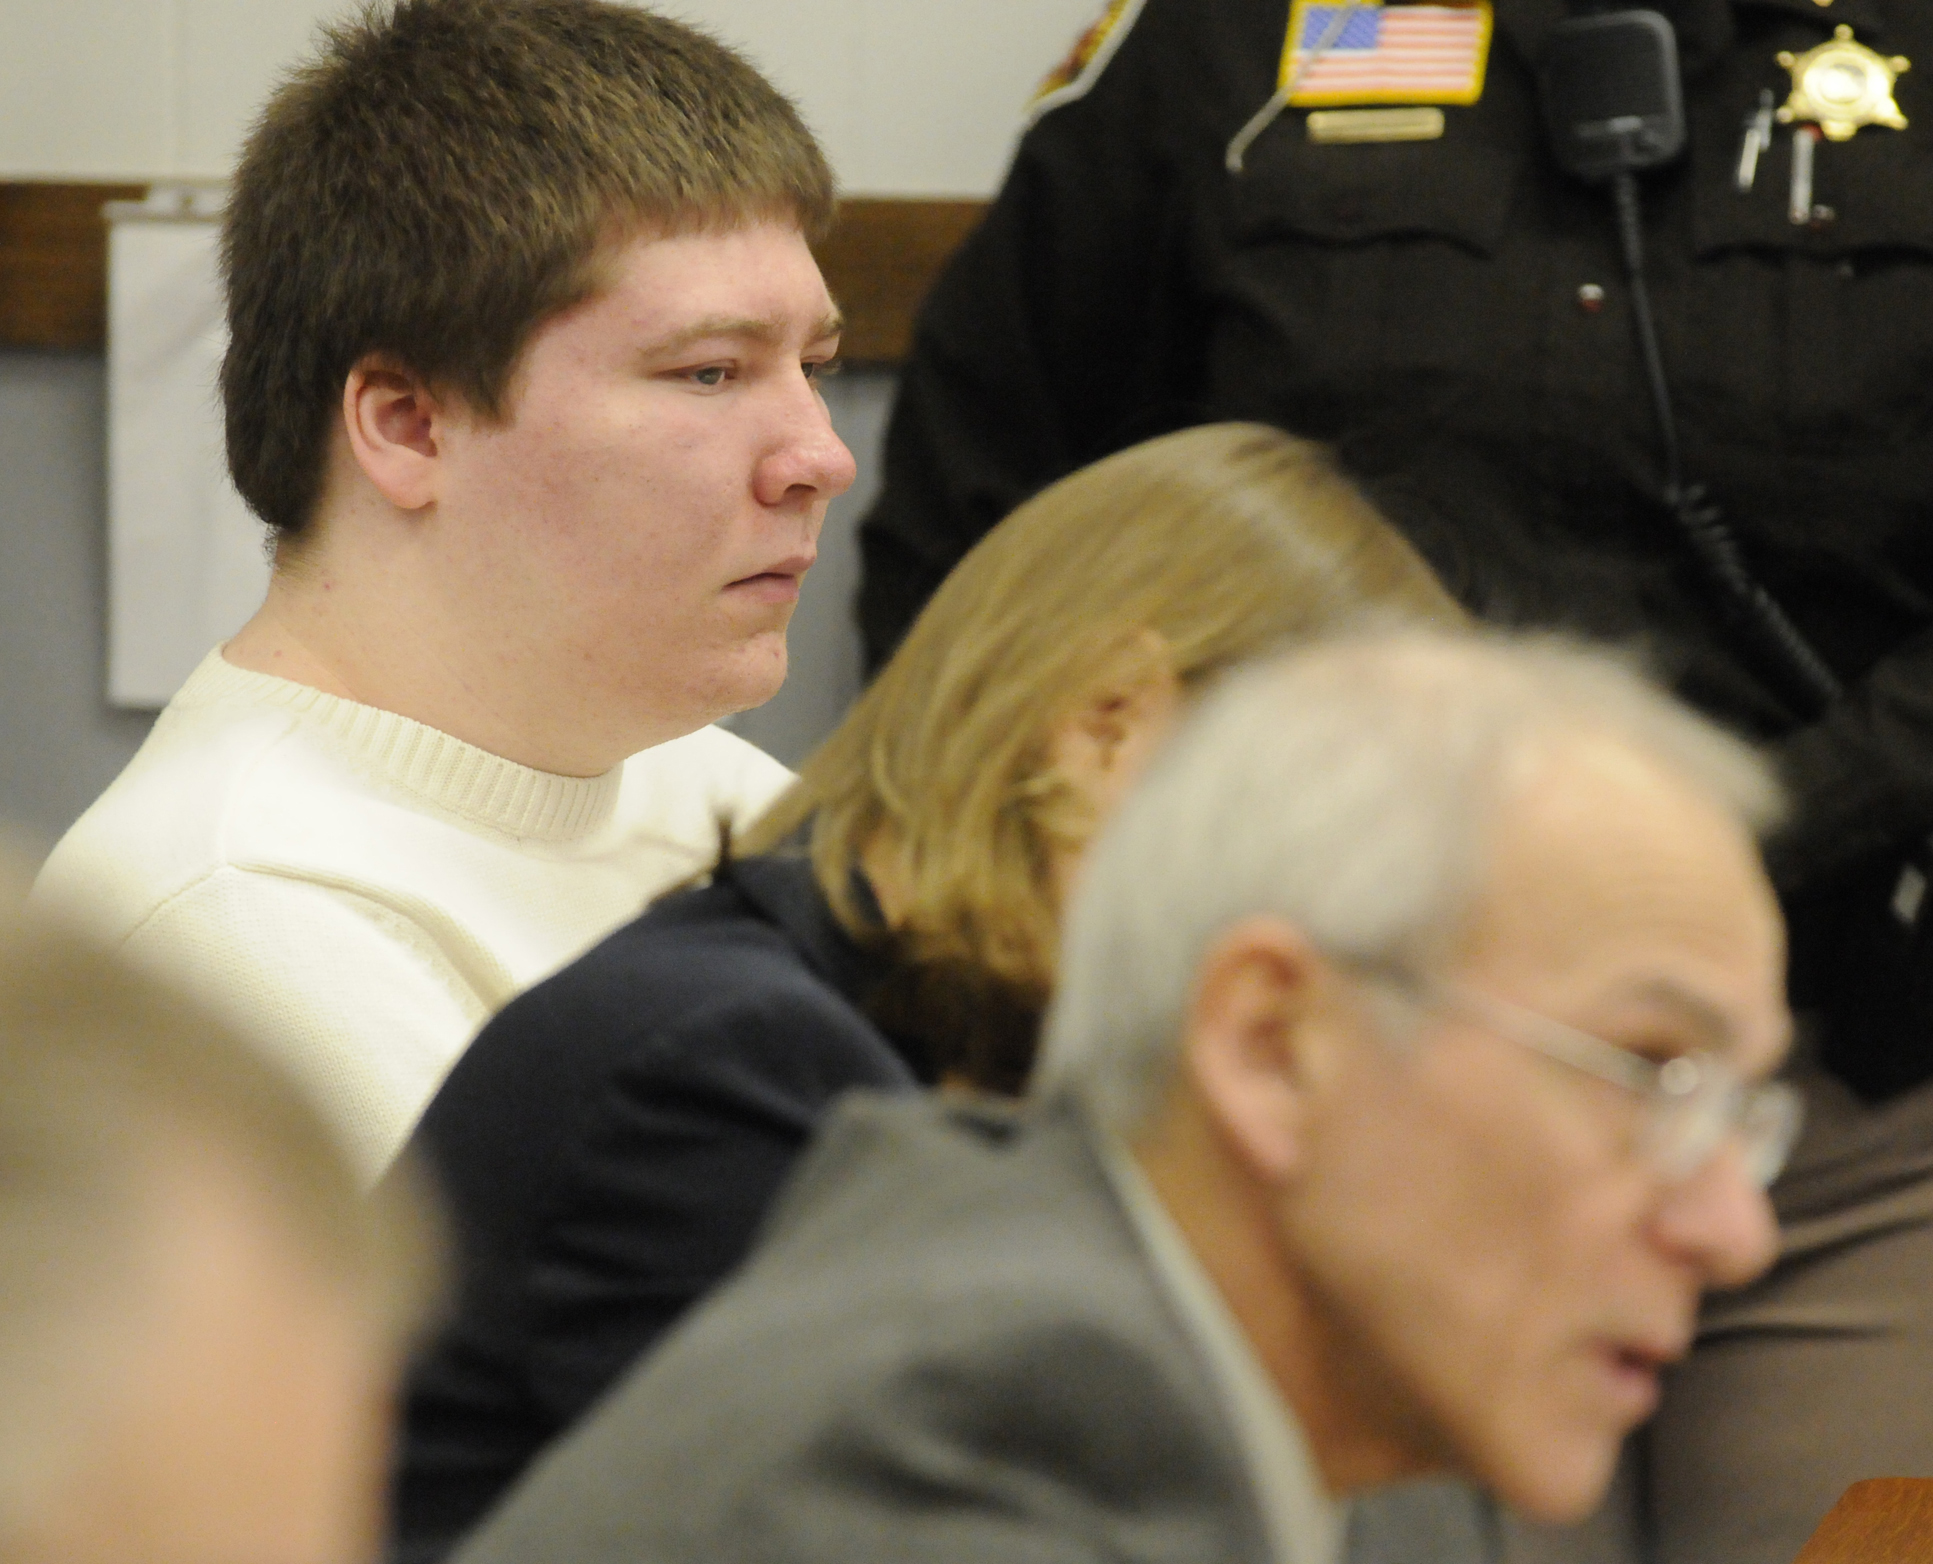 PHOTO: Brendan Dassey listens to testimony on Jan. 19, 2010 at the Manitowoc County Courthouse in Manitowoc, Wisconsin.